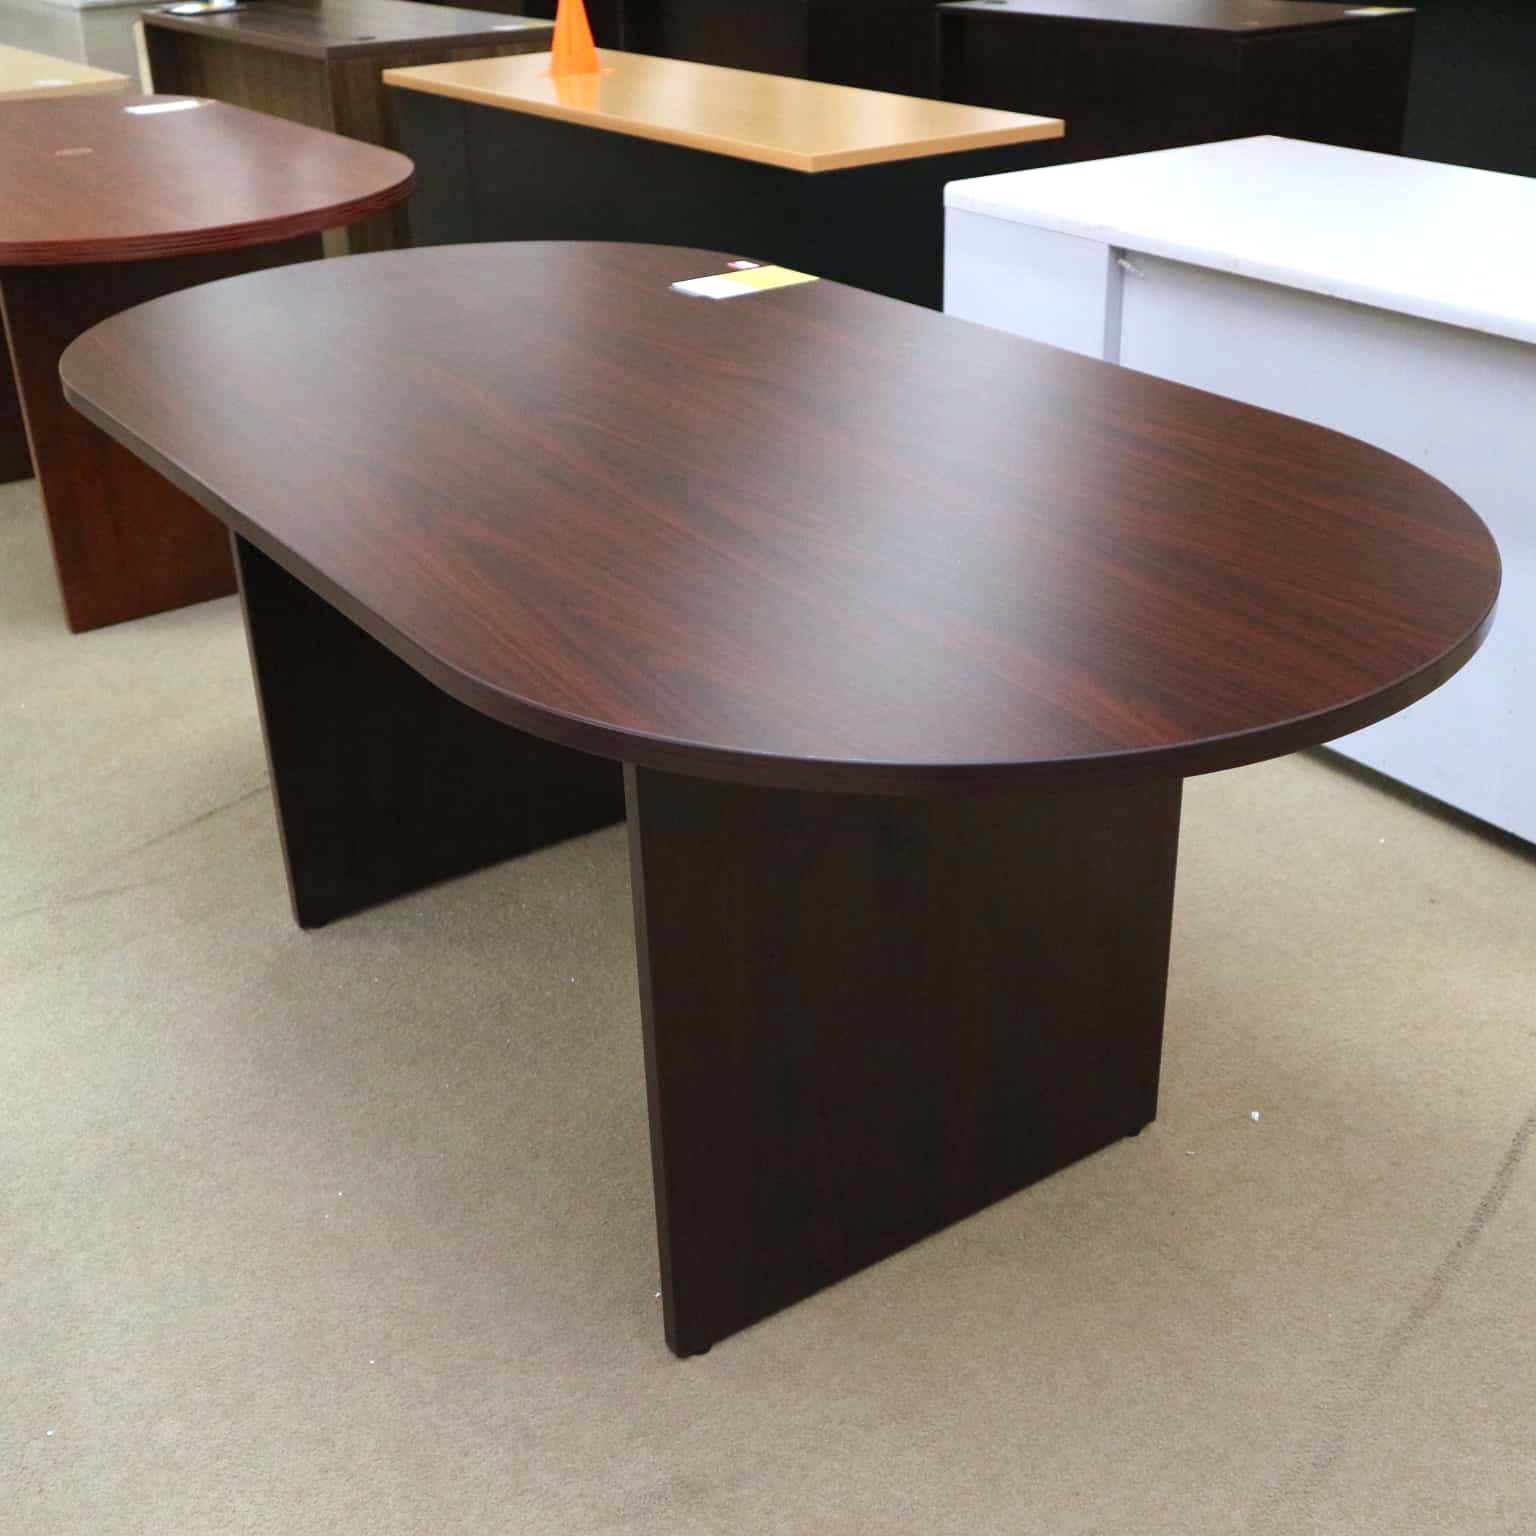 conference table 6'L x 3'D